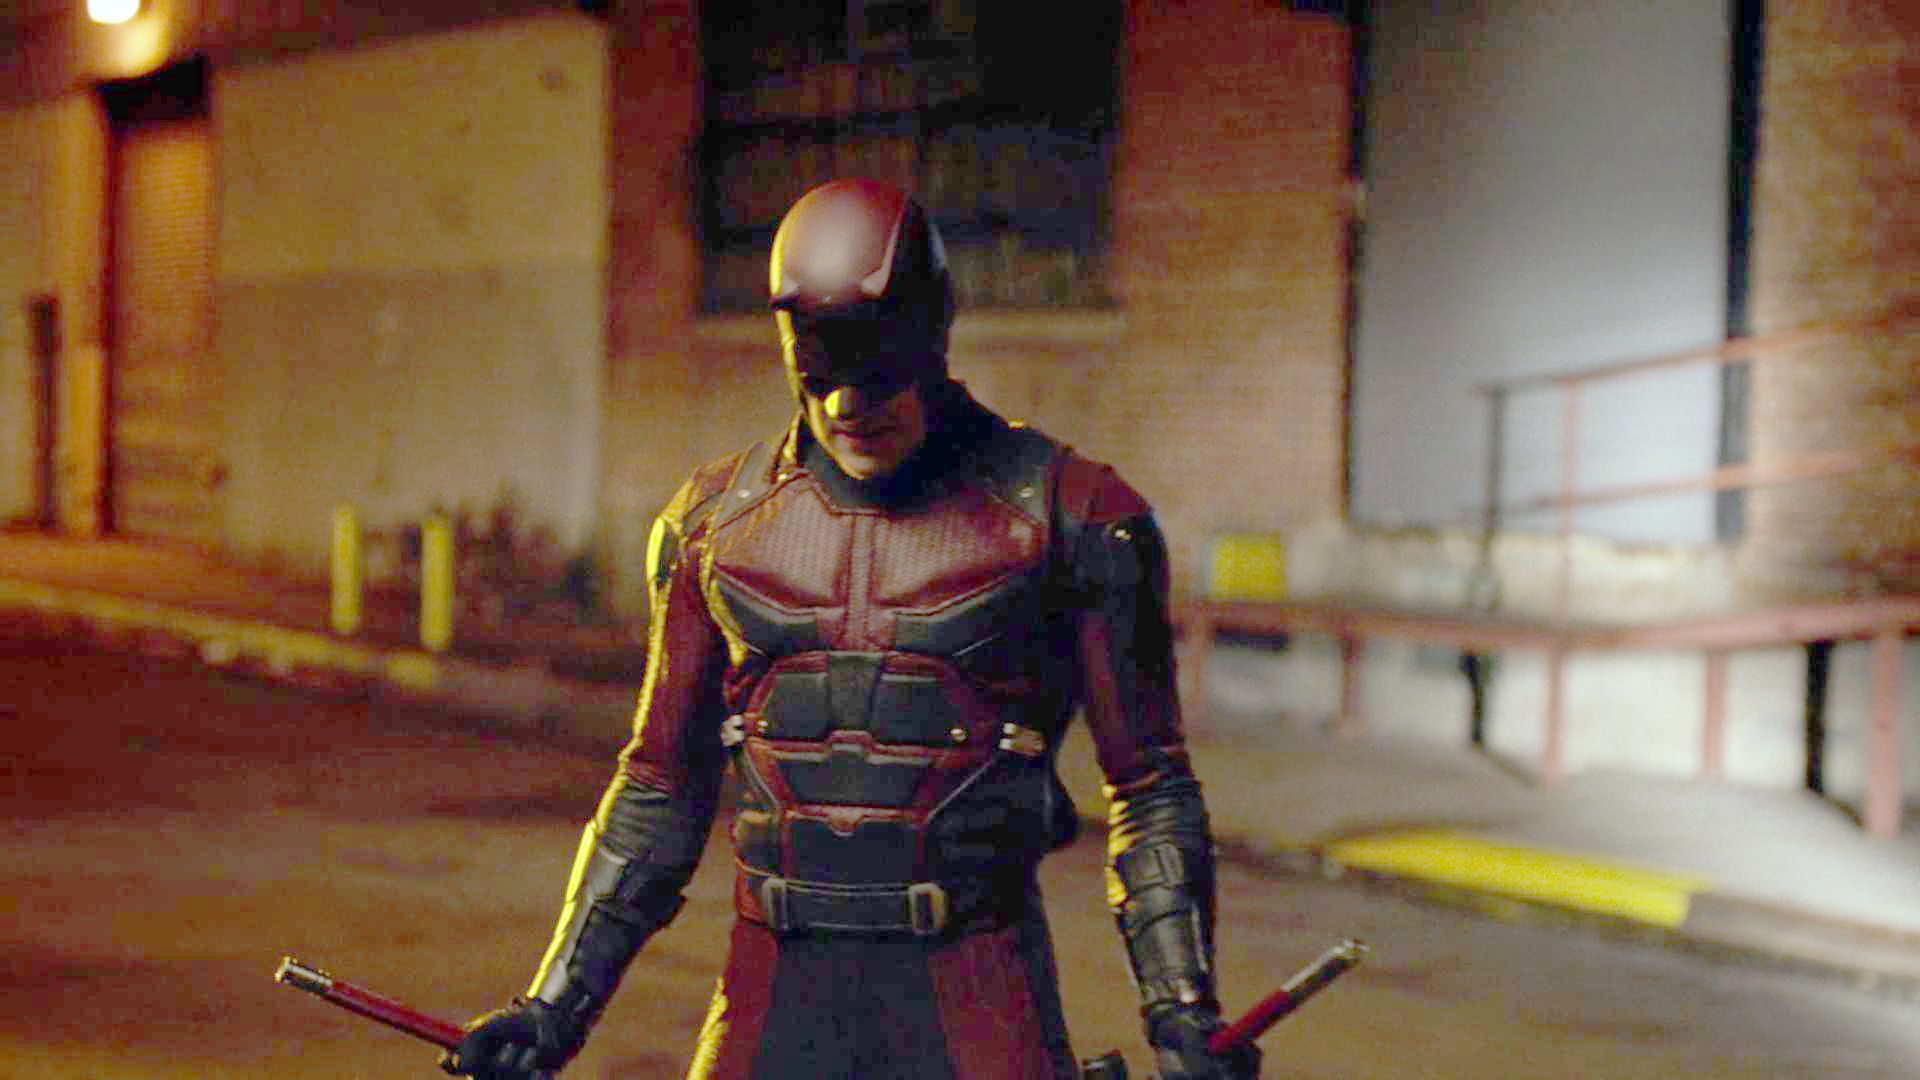 Daredevil' Season 2 Might Have A Premiere Date, But The Competition Is Fierce